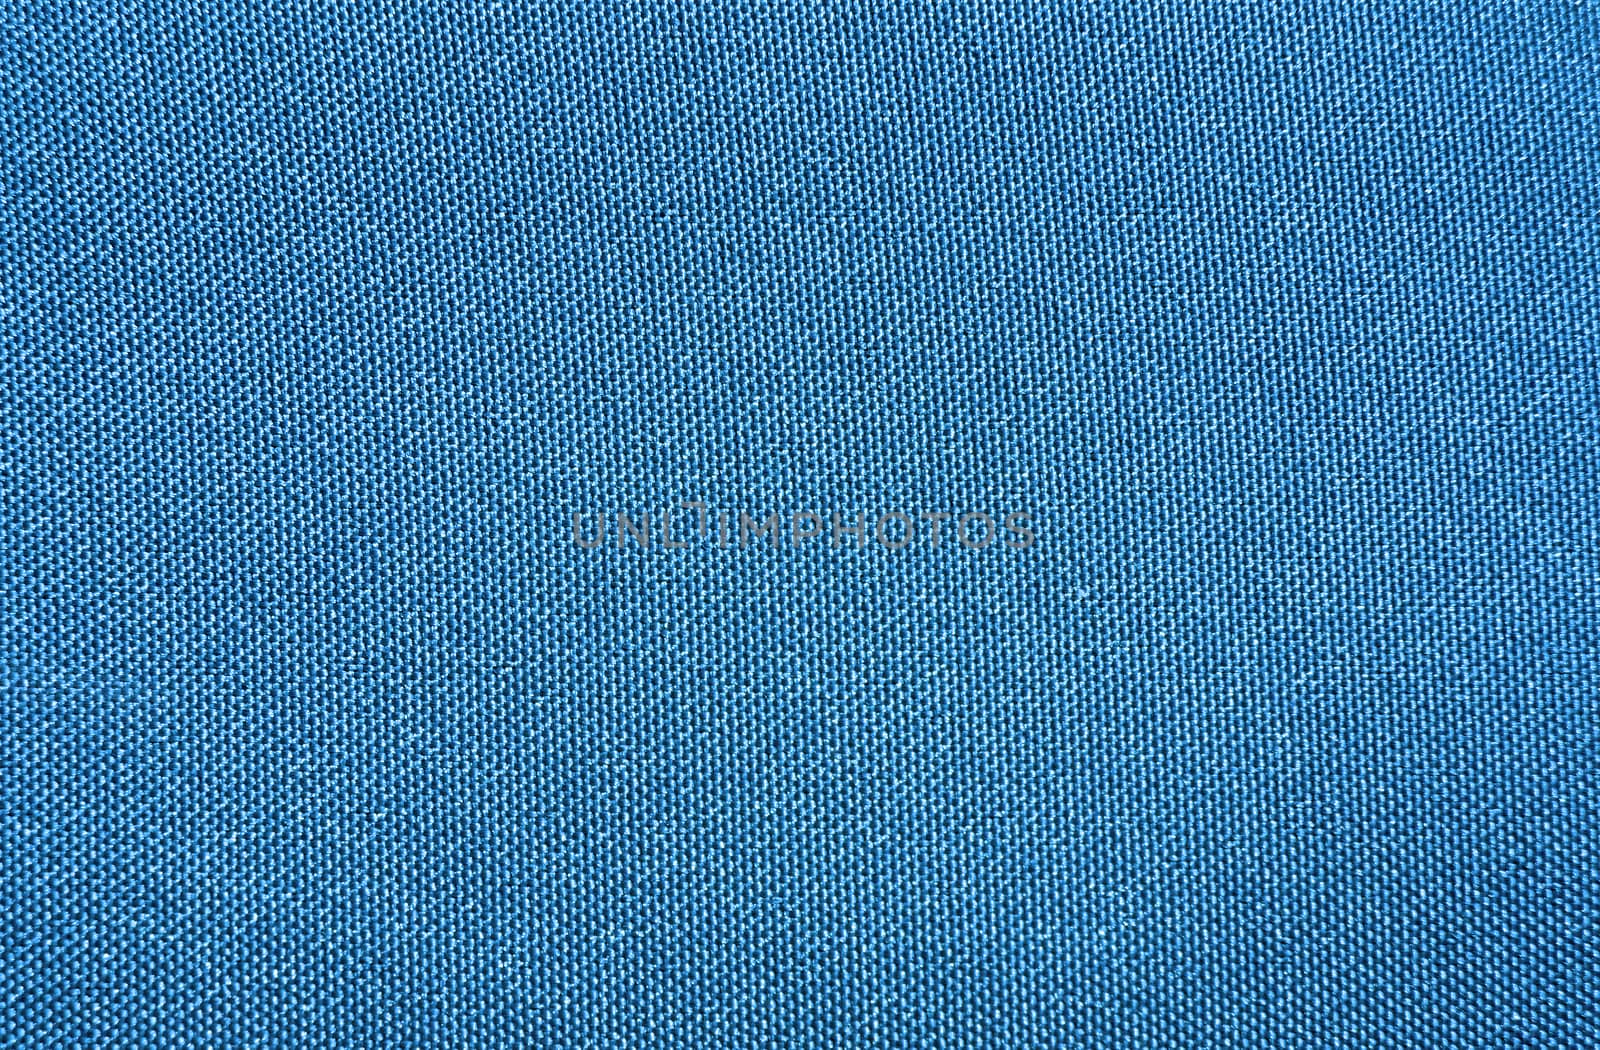 Texture of a blue woven synthetic waterproof fabric                               